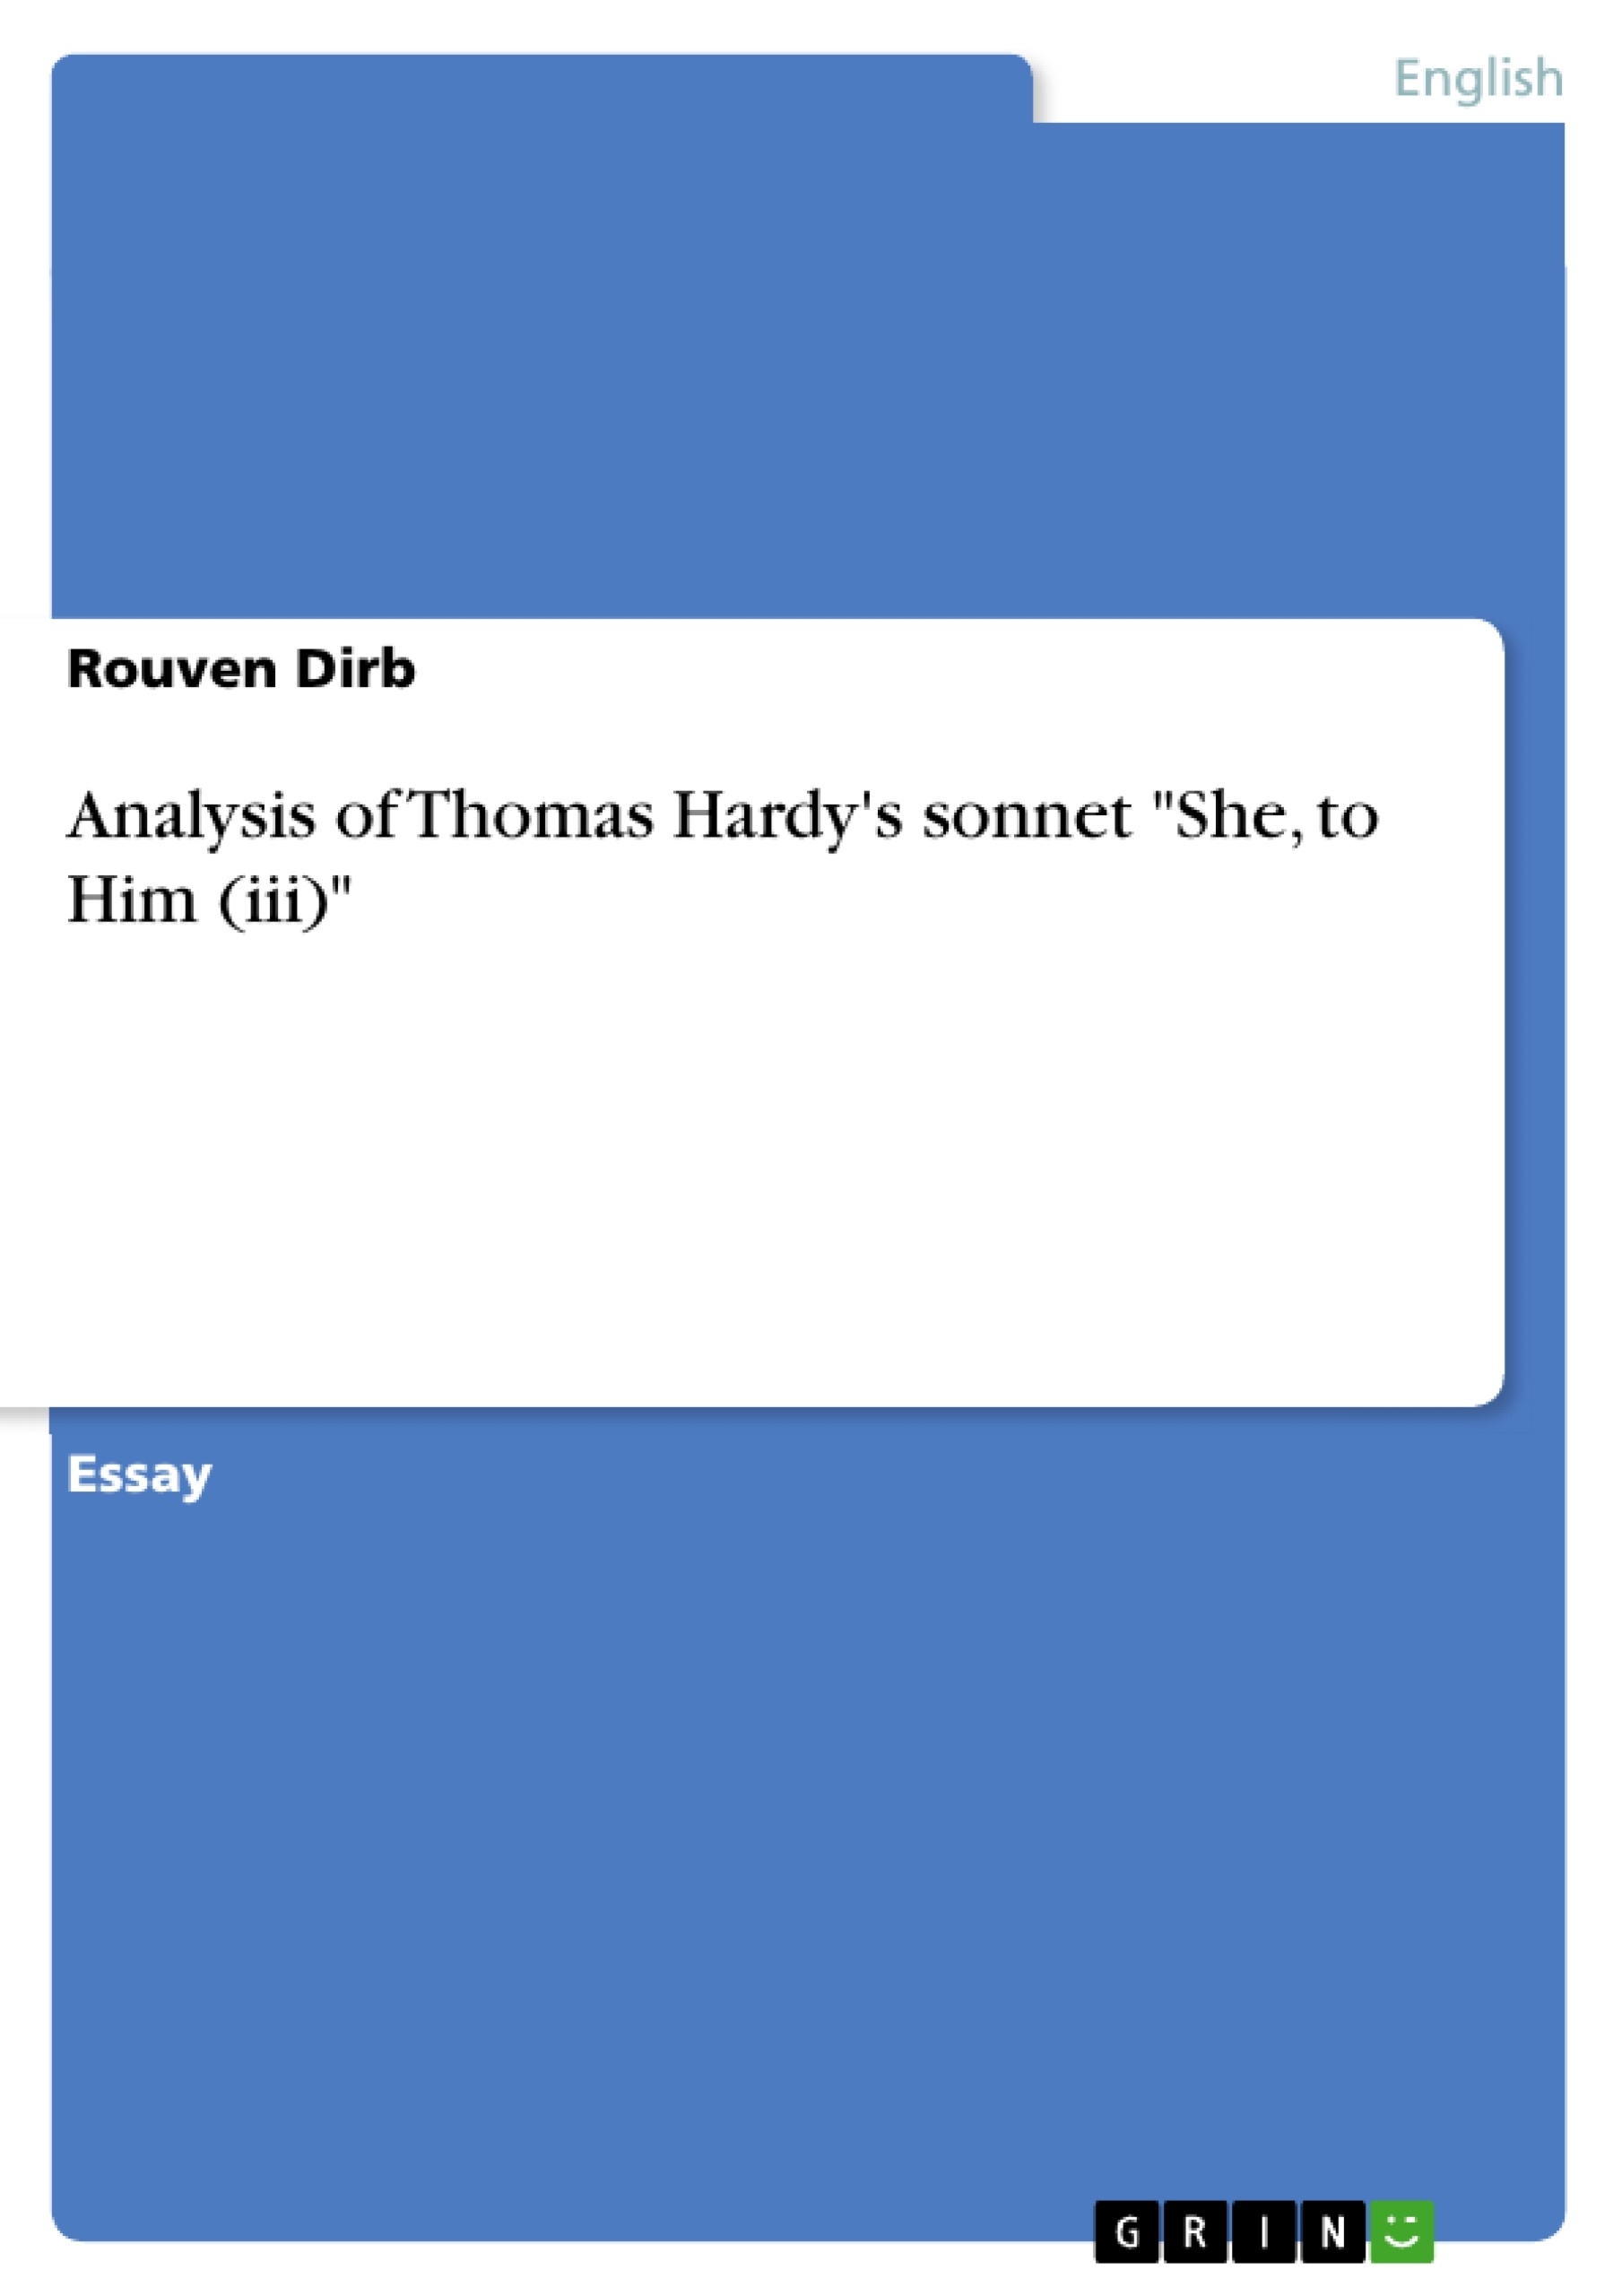 Titre: Analysis of Thomas Hardy's sonnet "She, to Him (iii)"